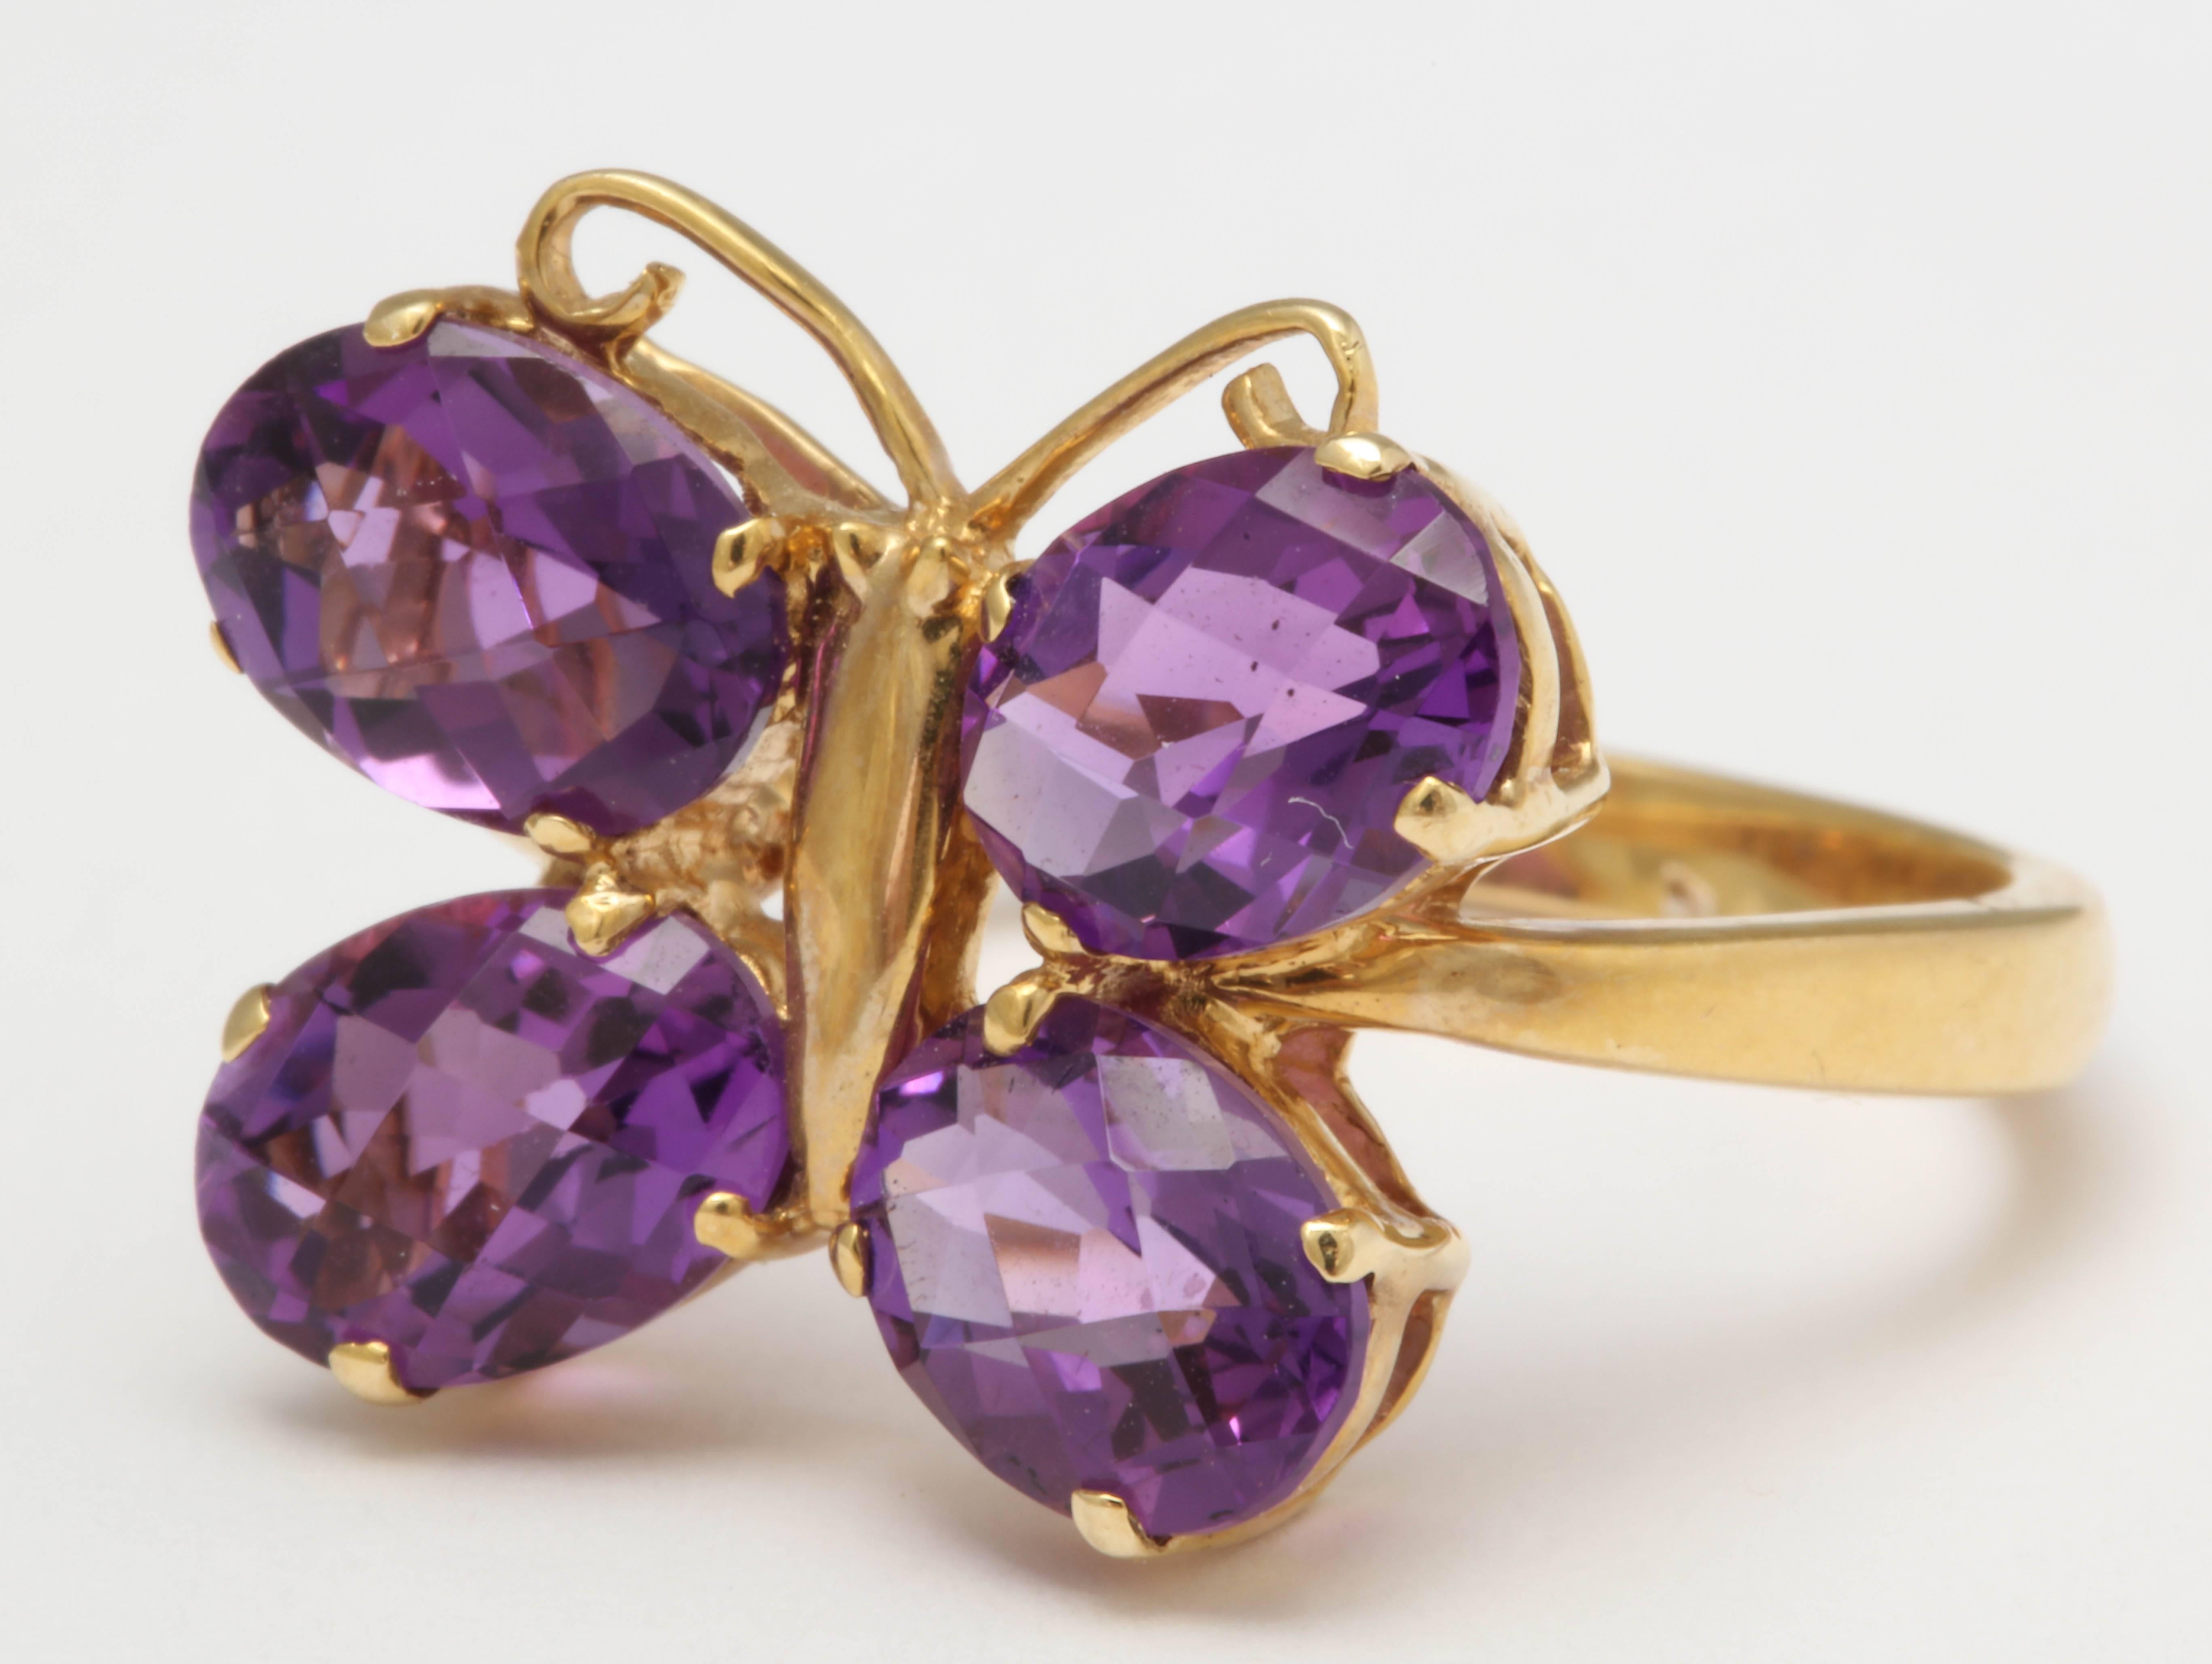 The wings of this  cute butterfly are set with 4 matching faceted amethyst ovals. The body of the butterfly and the shank of the ring are 14 kt yellow gold. The size of the ring is 8-8.5 and can be sized. This ring matches earrings